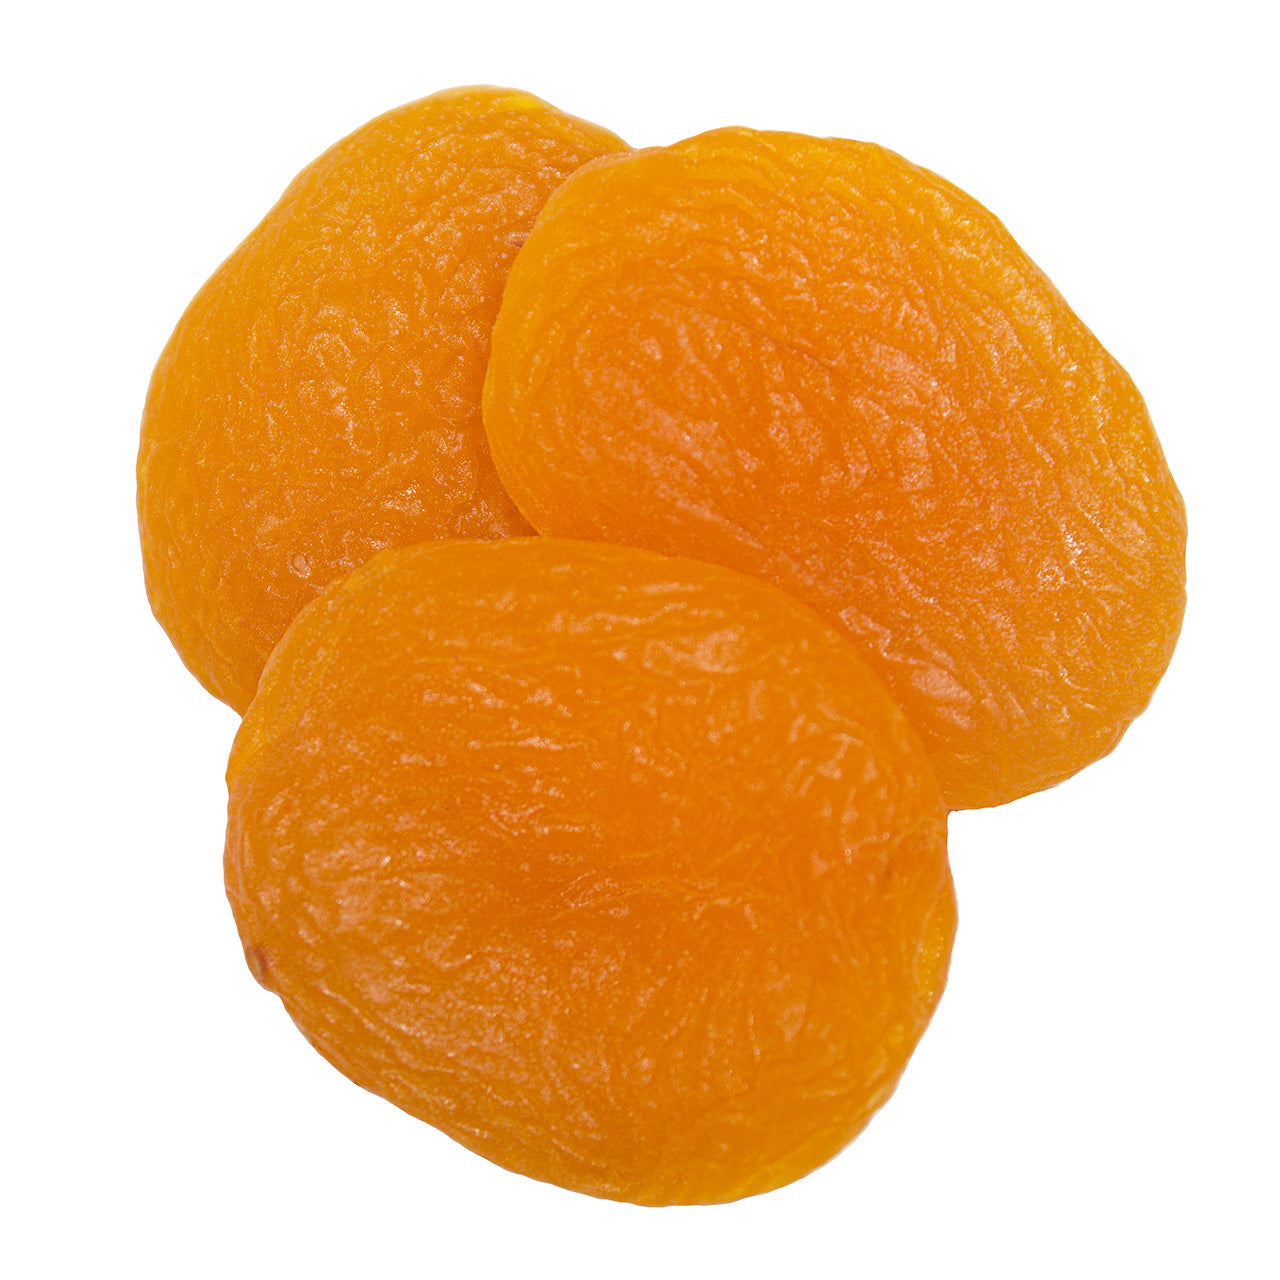 Turkish Apricots - Dried Mediterranean Apricots from Turkey – Bella Viva  Orchards